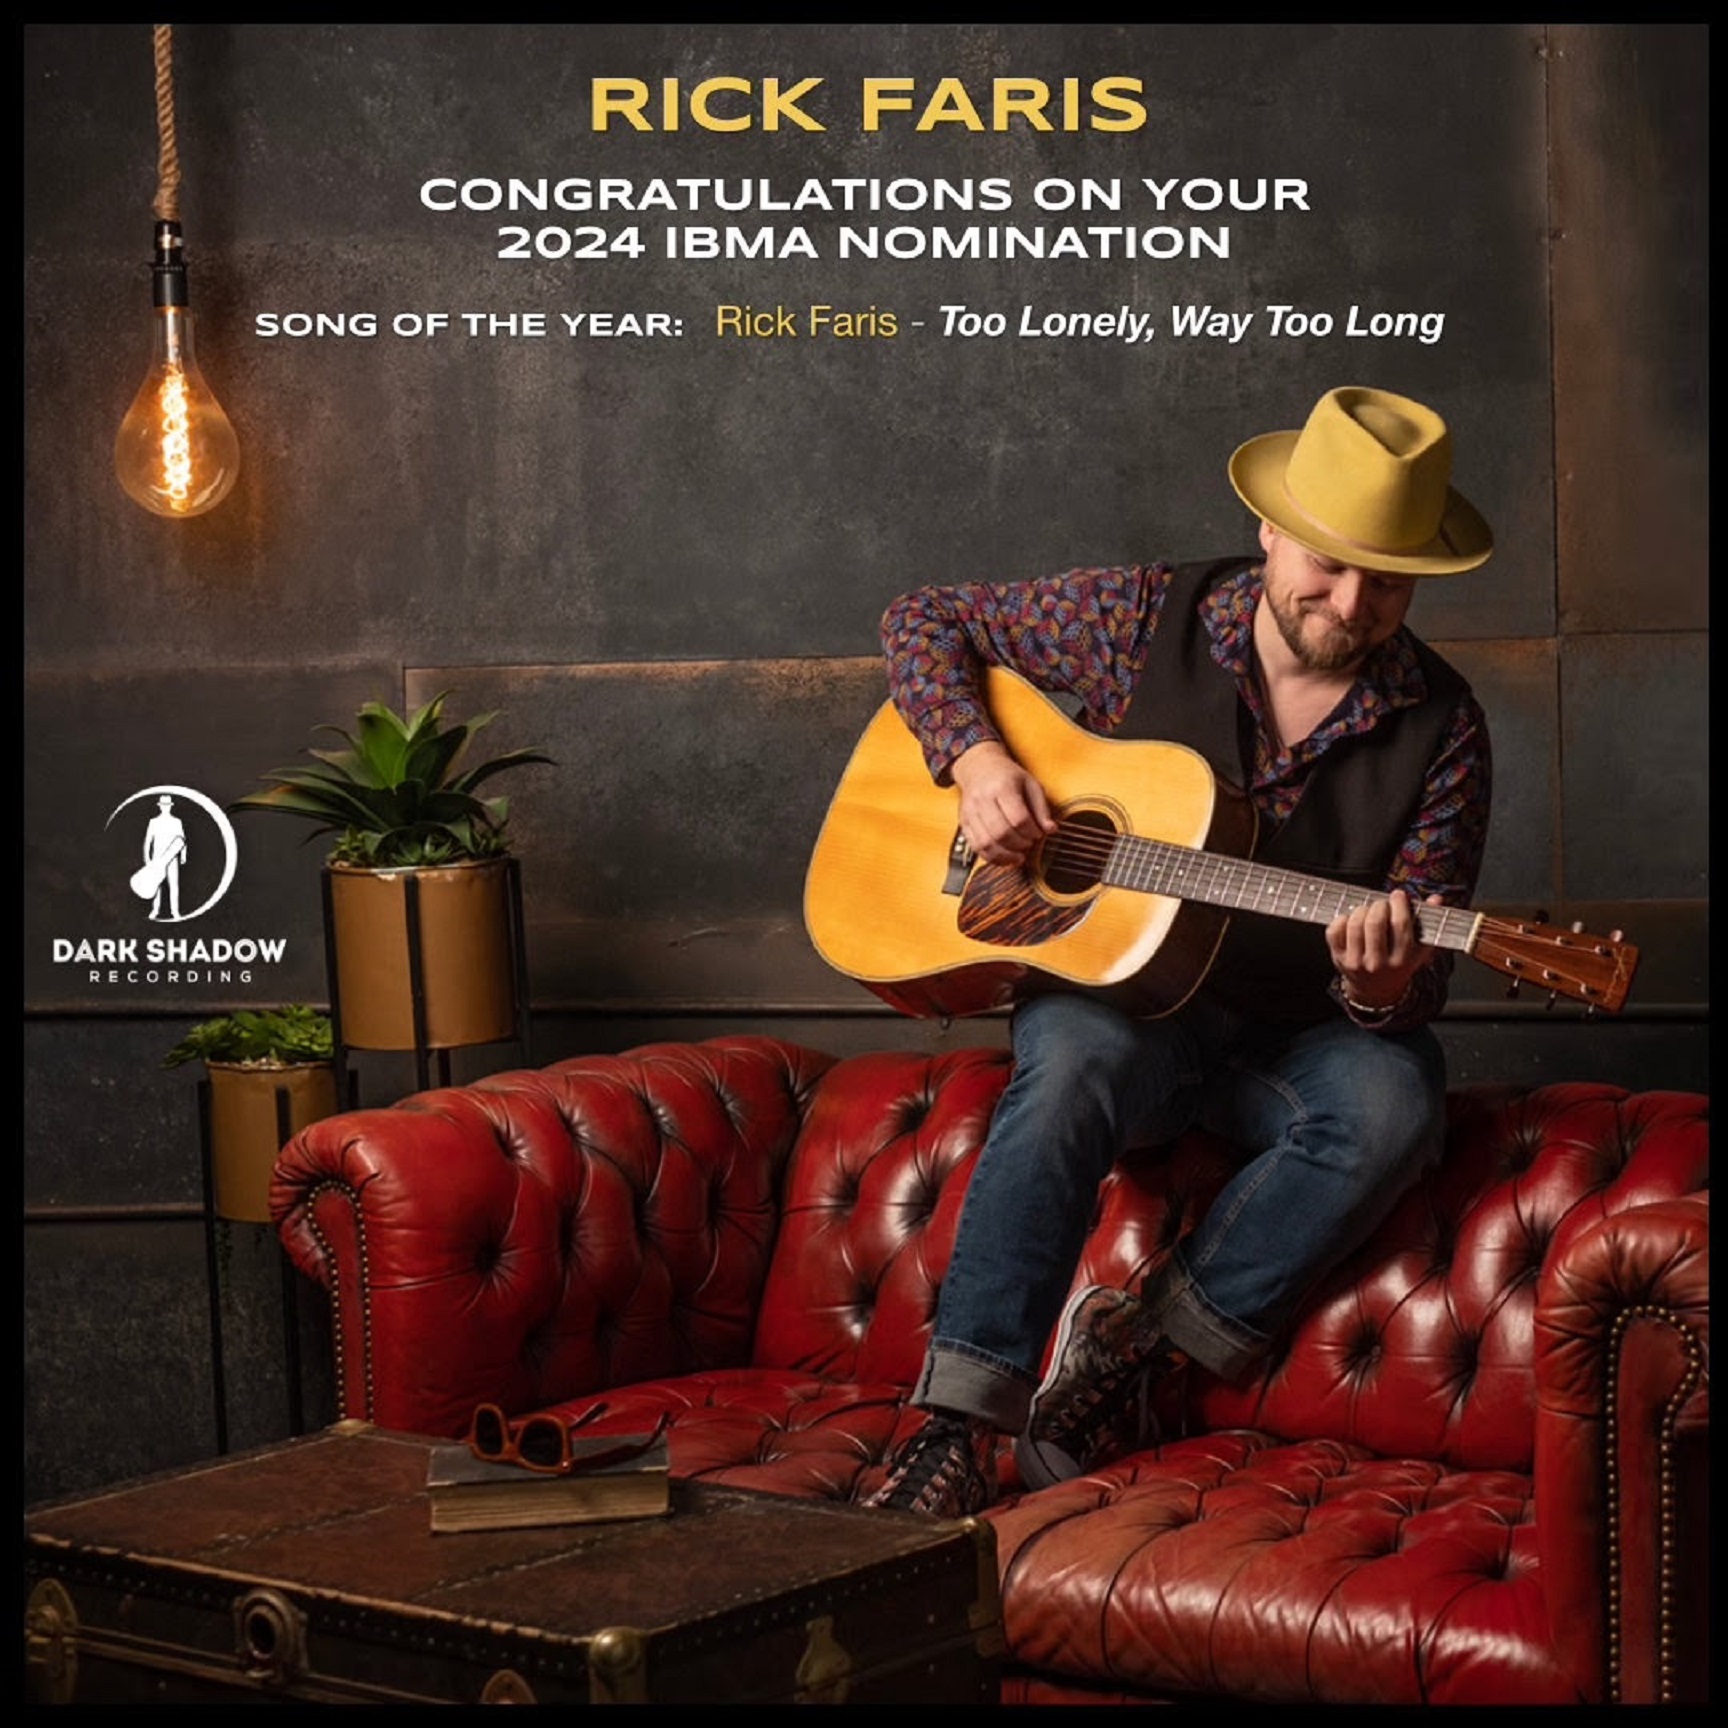 Congratulations to Rick Faris on his 2024 IBMA Song of the Year nomination